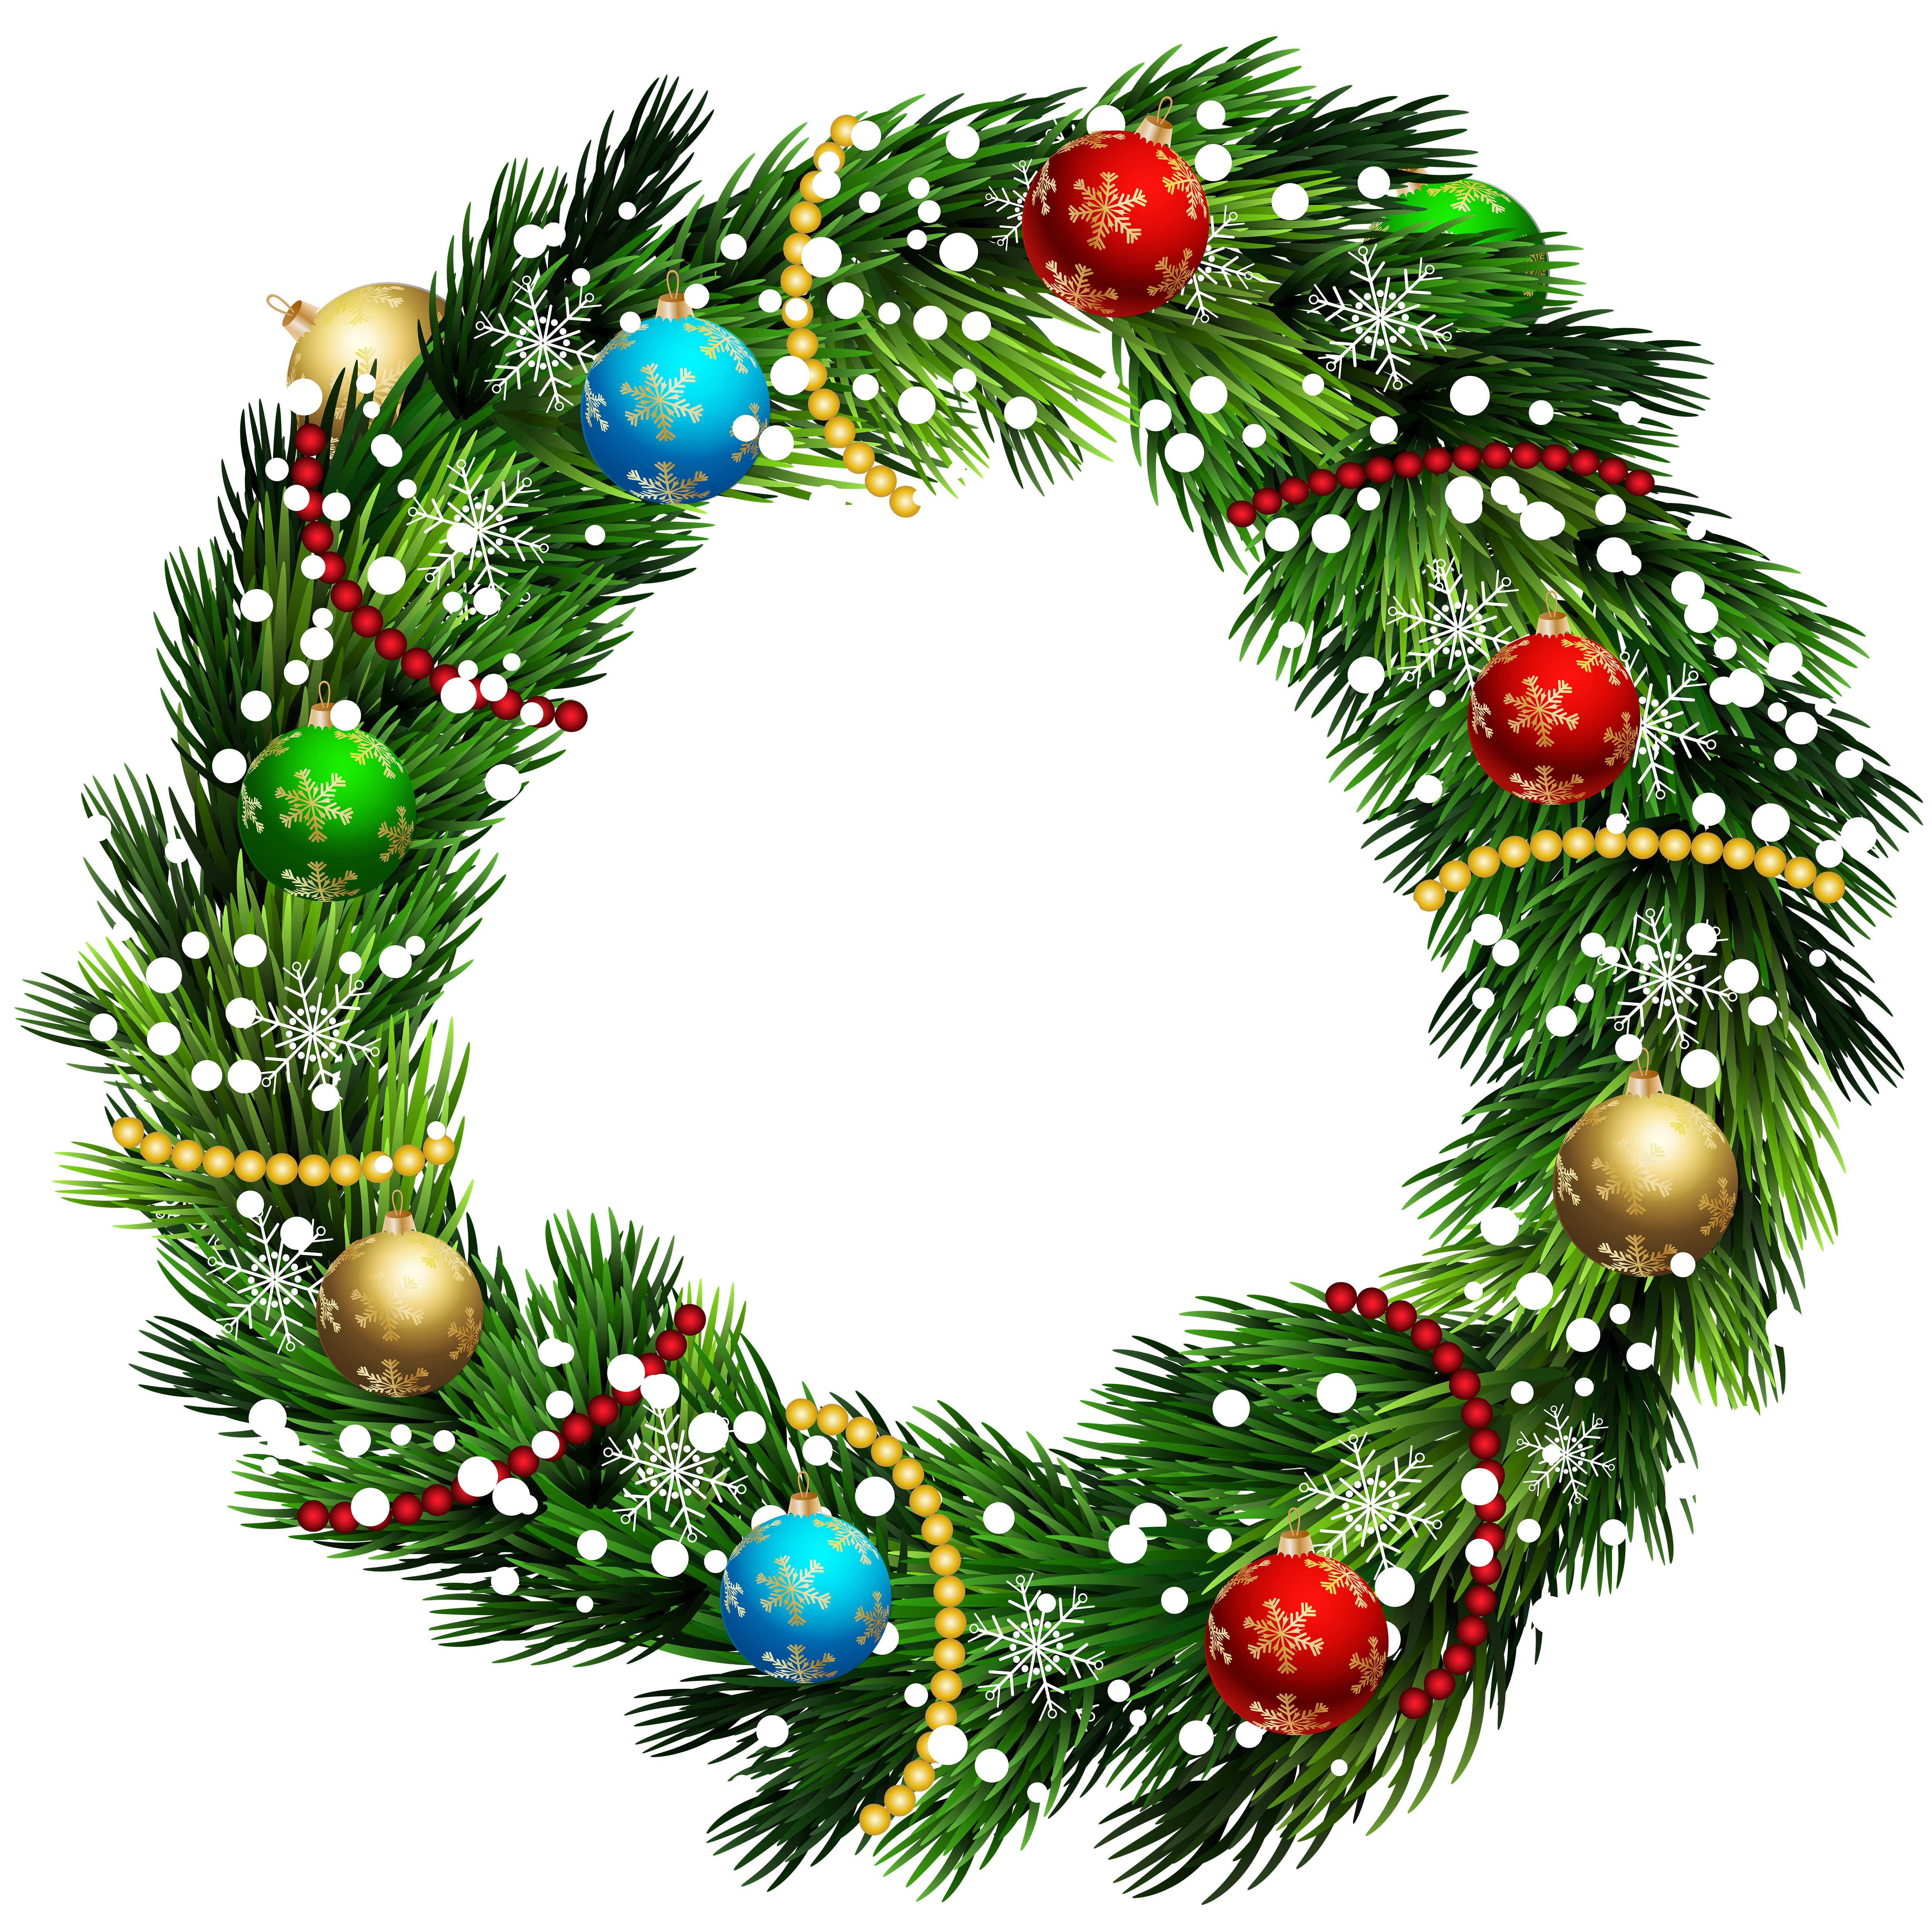 Christmas Wreath PNG Clip Art Image​-Quality Image and Transparent PNG Free Clipart